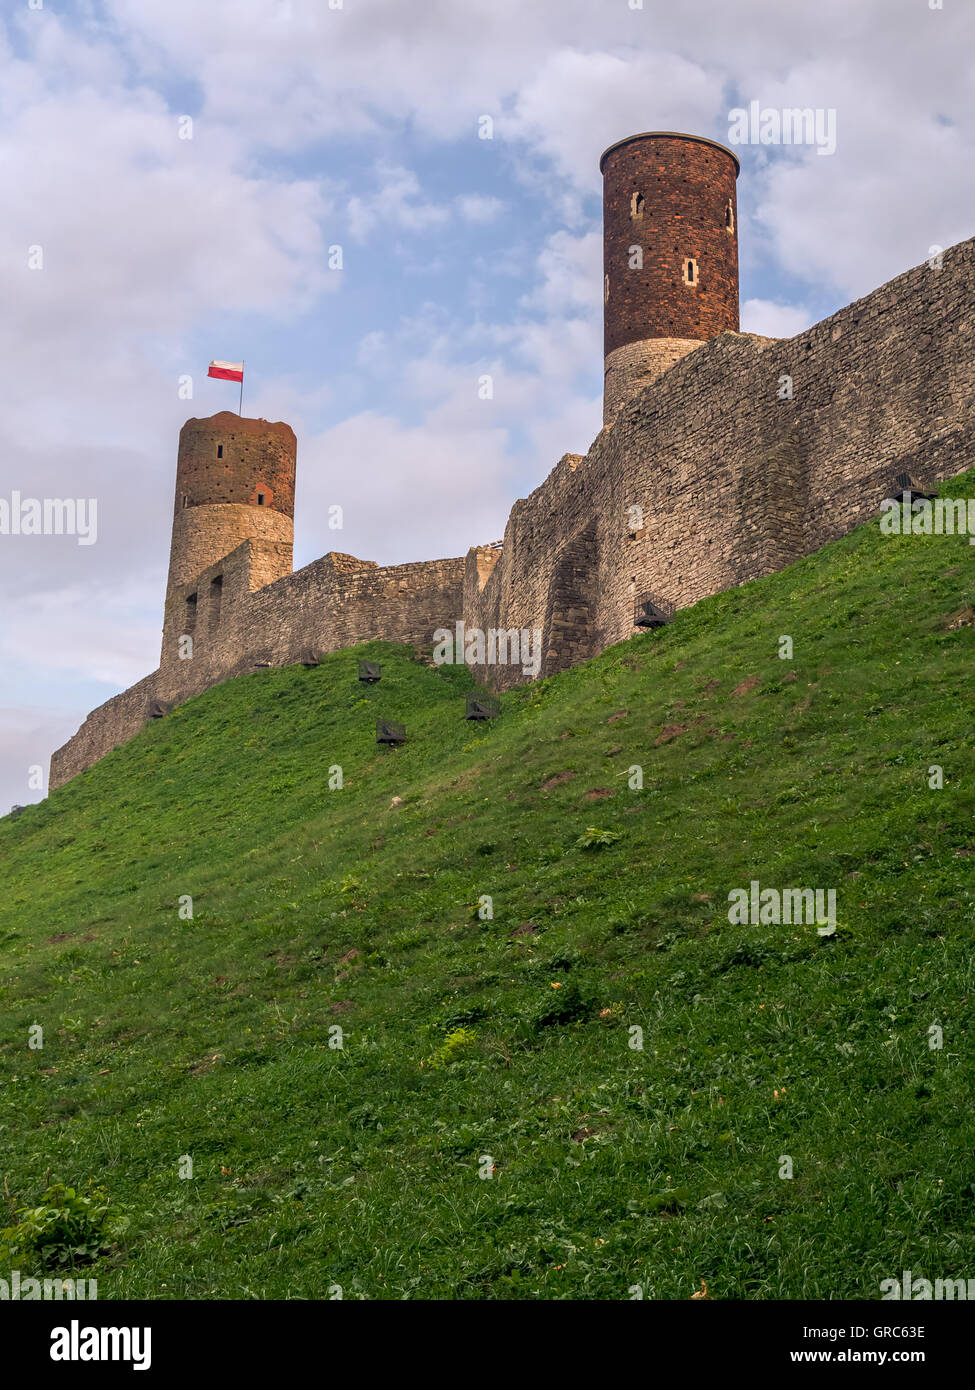 Ruins of medieval castle in Checiny, Poland Stock Photo